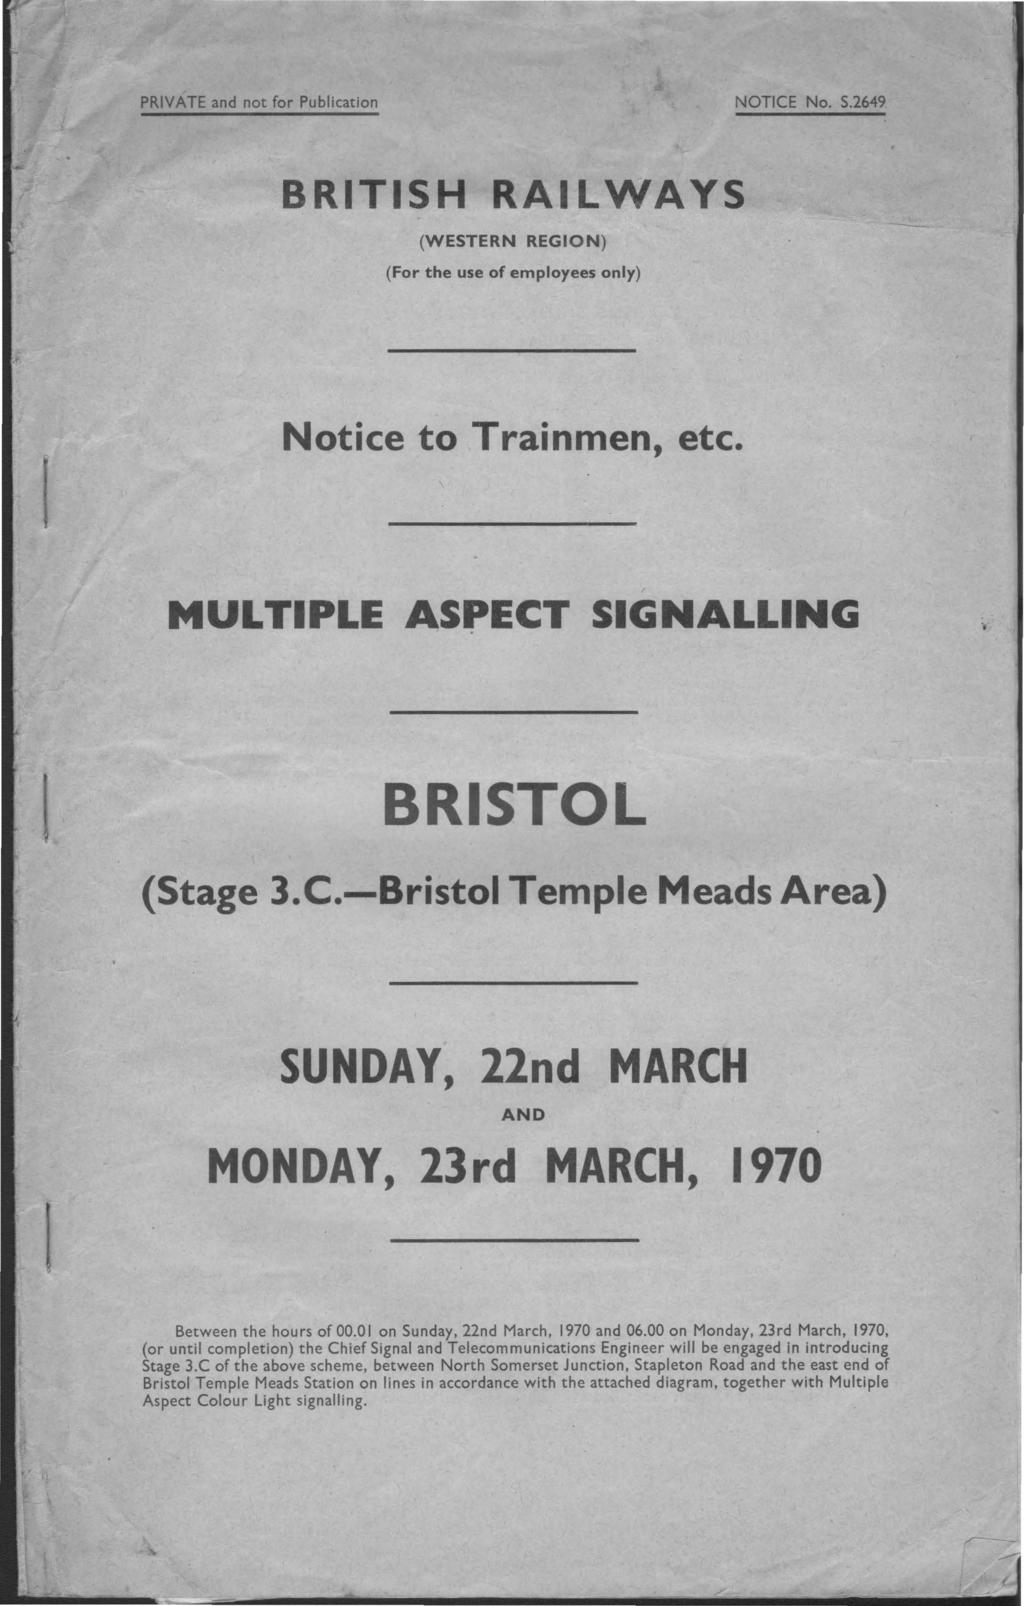 PRIVATE and not for Publication NOTICE No. S.2649 BRITISH RAILWAYS (WESTERN REGION) (For the use of employees only) Notice to Trainmen, etc. MULTIPLE ASPECT SIGNALLING BRISTOL (Stage 3.C.-Bristol Temple Meads Area) SUNDAY, 22nd MARCH AND MONDAY, 23rd MARCH, 1970 Between the hours of 00.